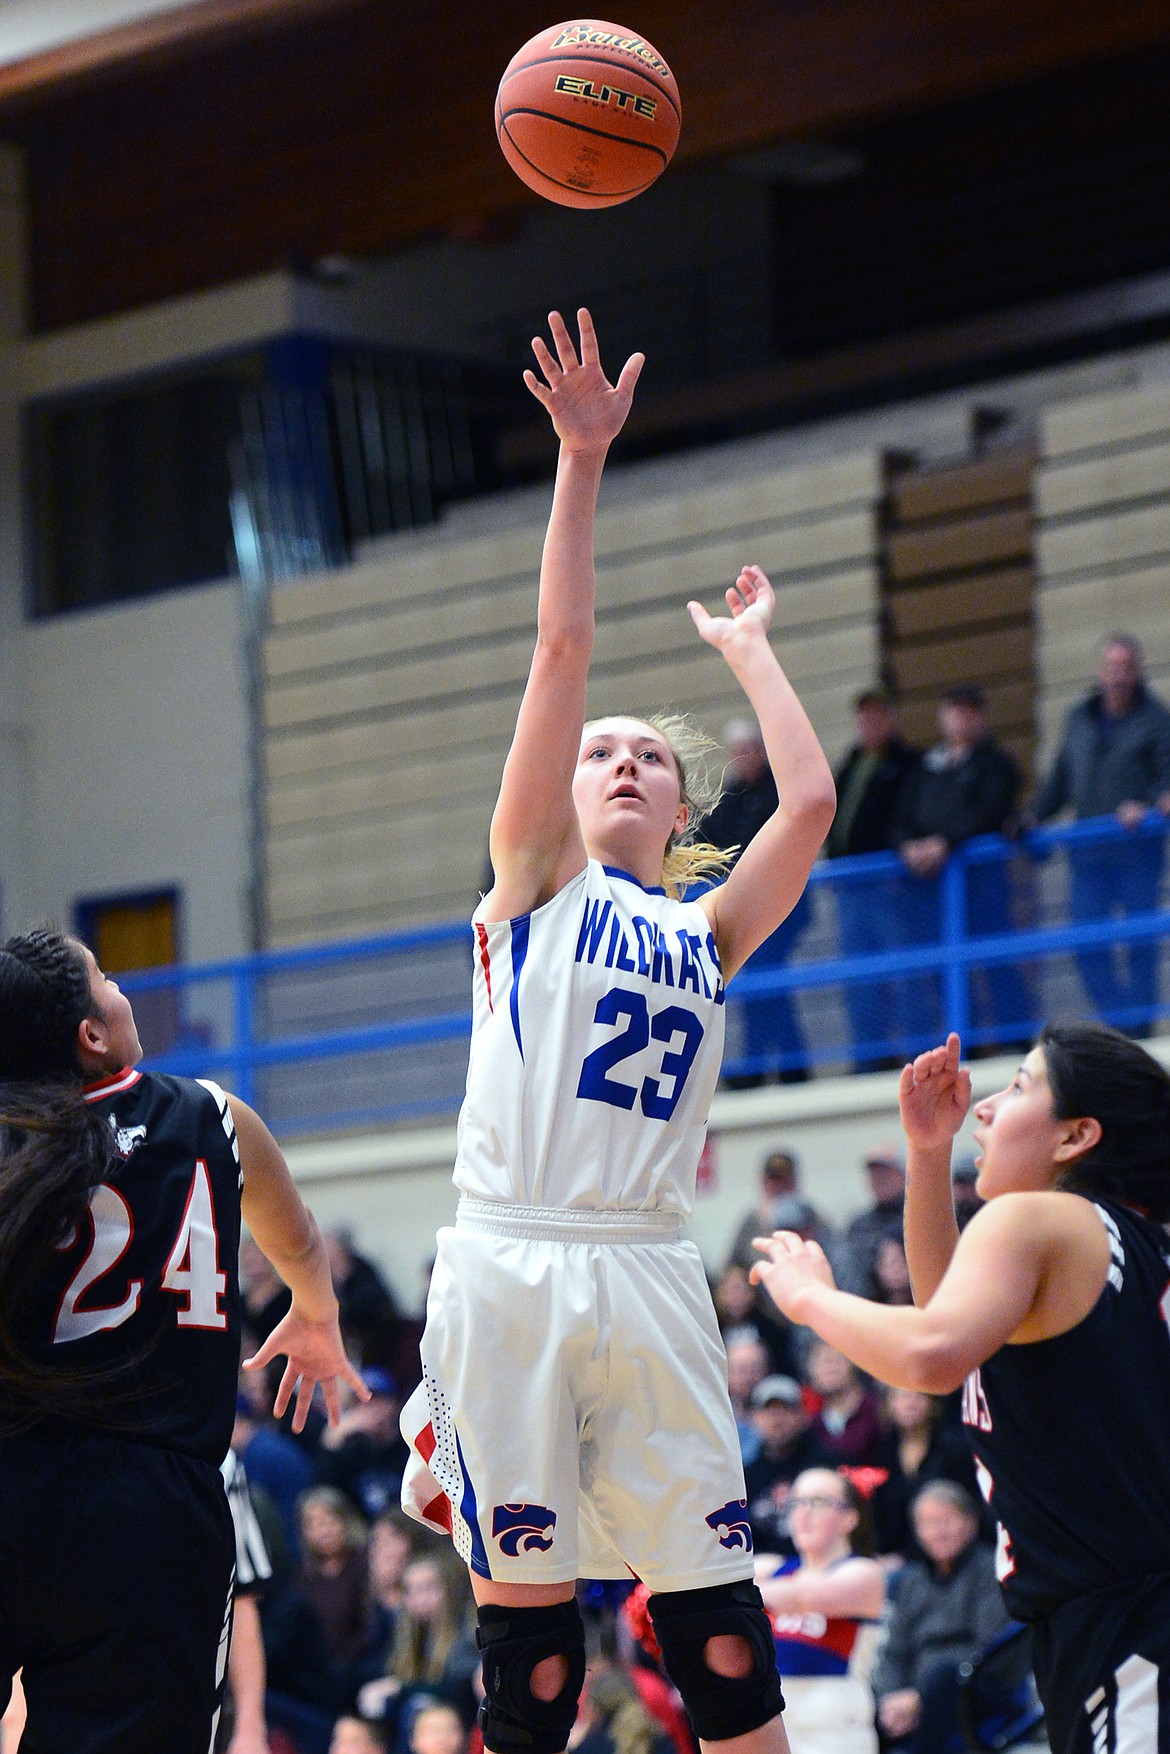 Columbia Falls' Ryley Kehr (23) looks to shoot in the second half against Browning at Columbia Falls High School on Saturday. (Casey Kreider/Daily Inter Lake)